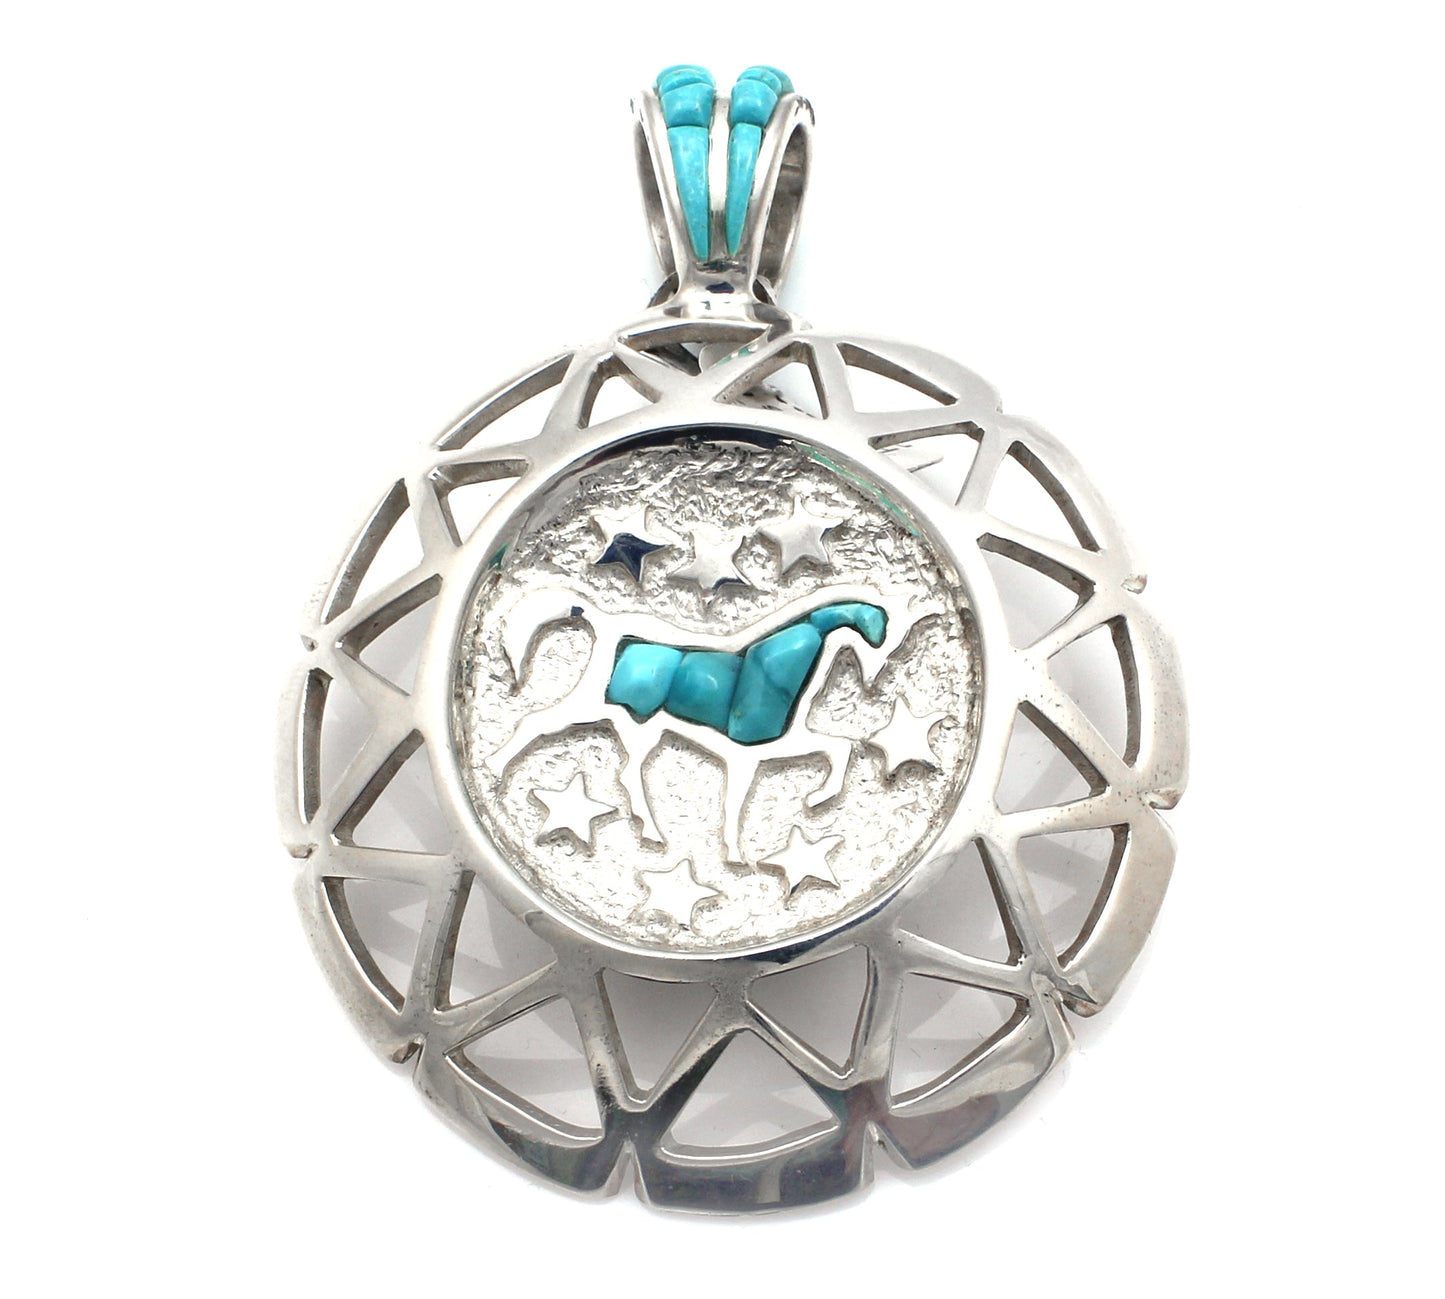 Horses In Your Dreams Pendant